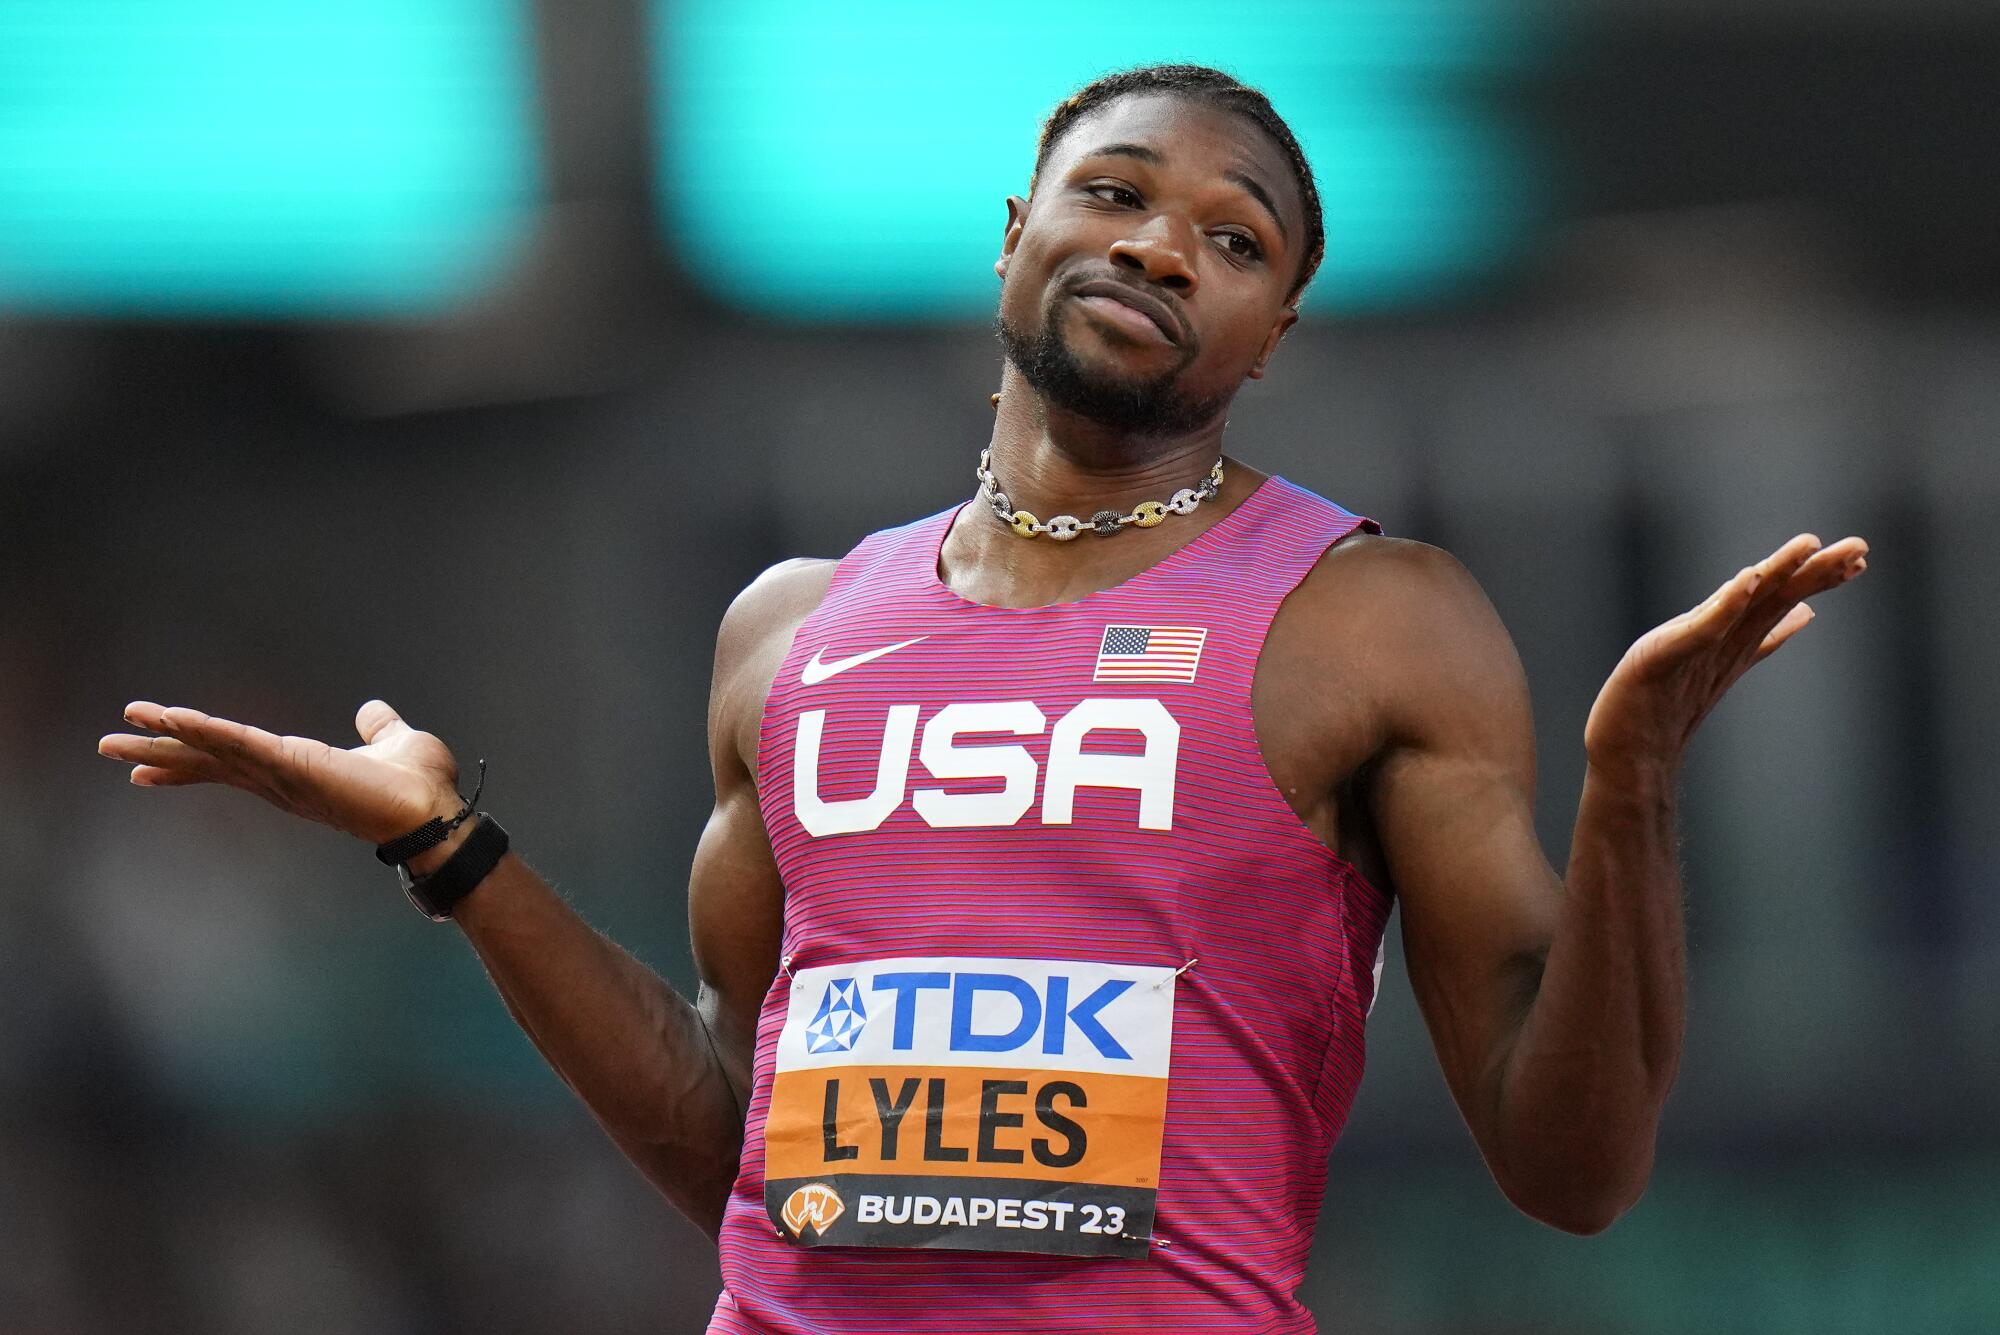 Noah Lyles reacts after crossing the finish line in the men's 200-meter semifinal at the World Athletics Championships.